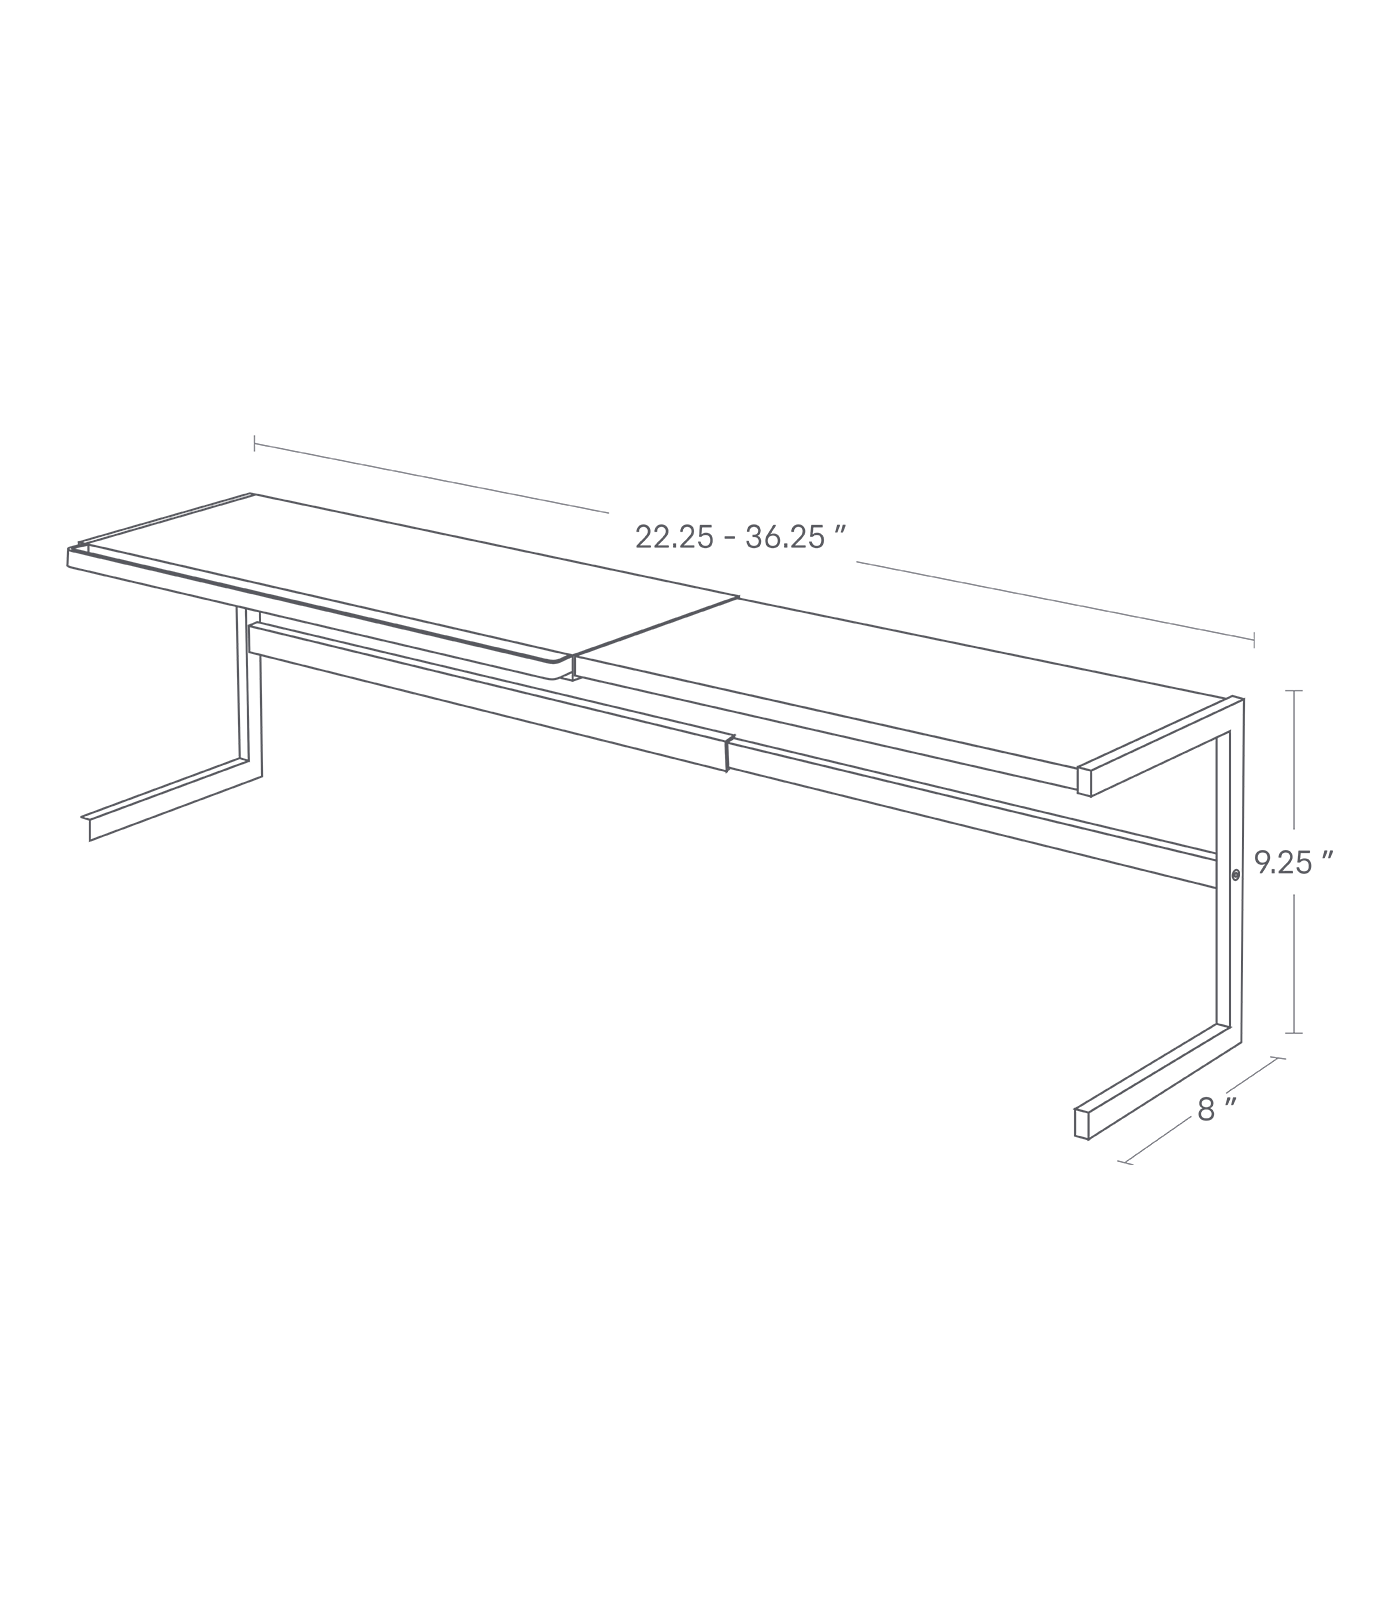 Dimension image for Countertop Shelf showing expandabble length of 22.25